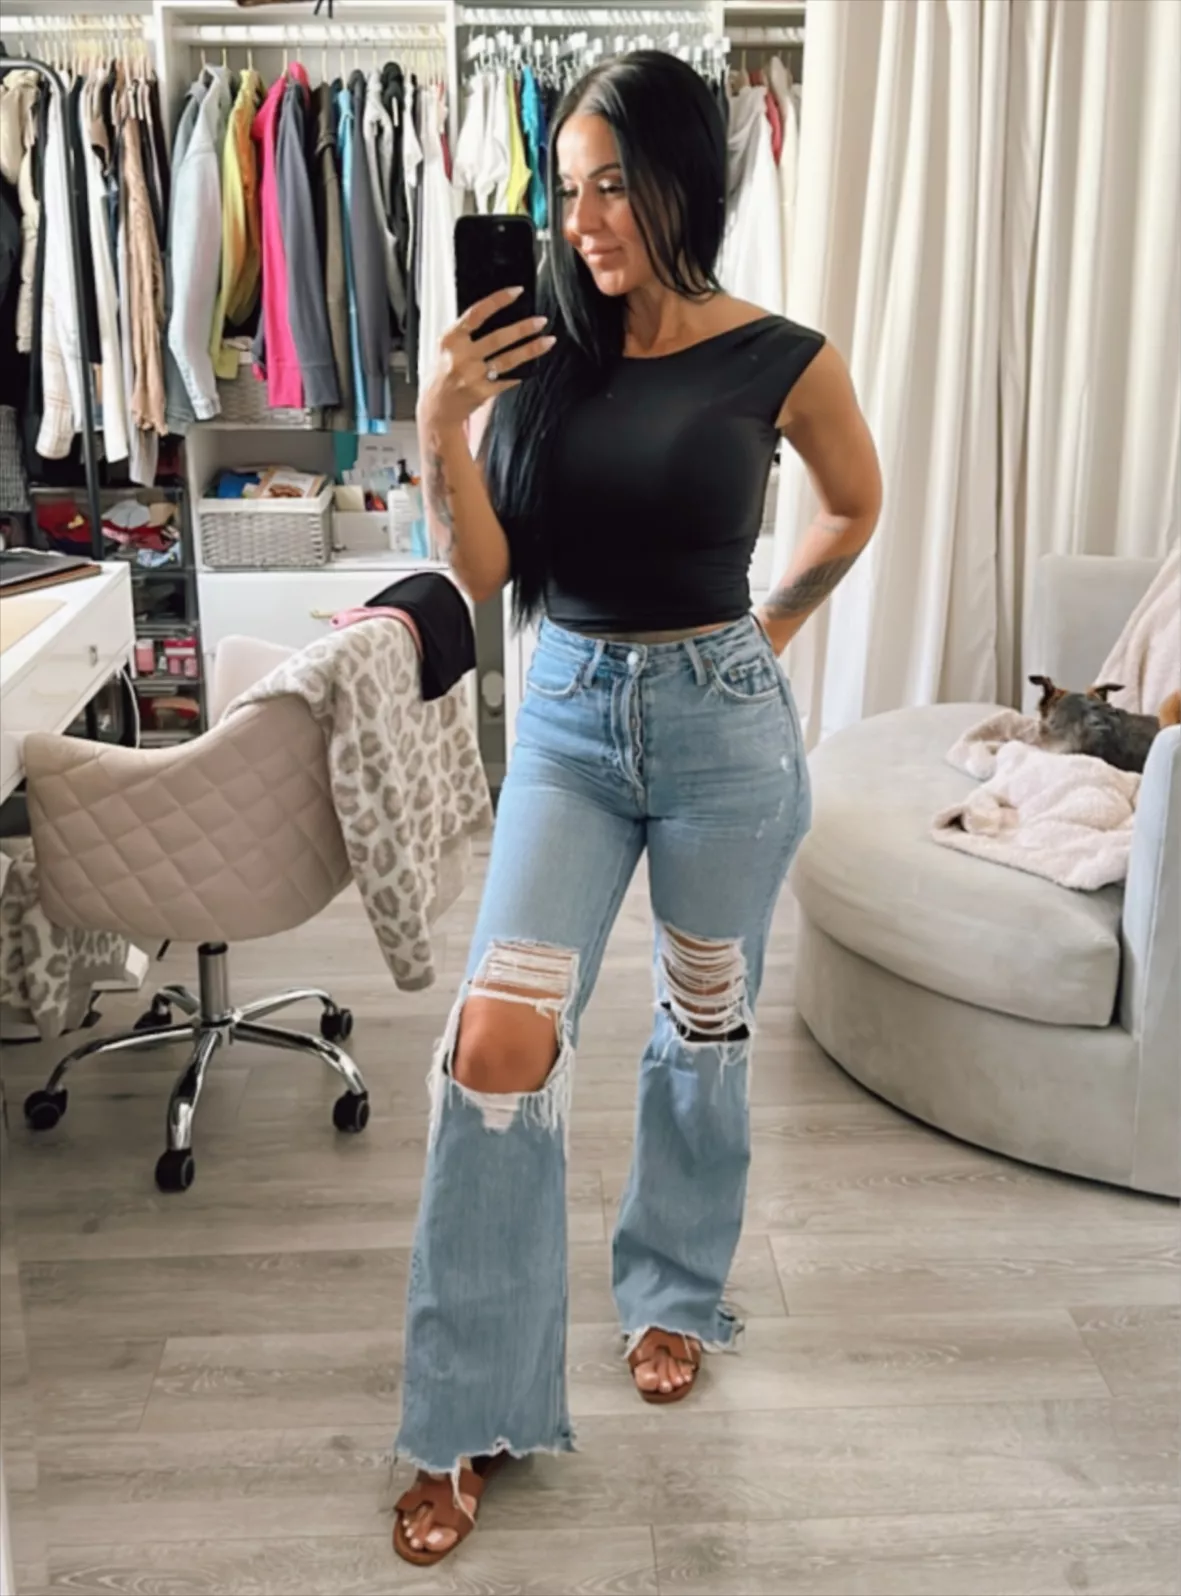 Backless top  Backless top, Fashion, Mom jeans